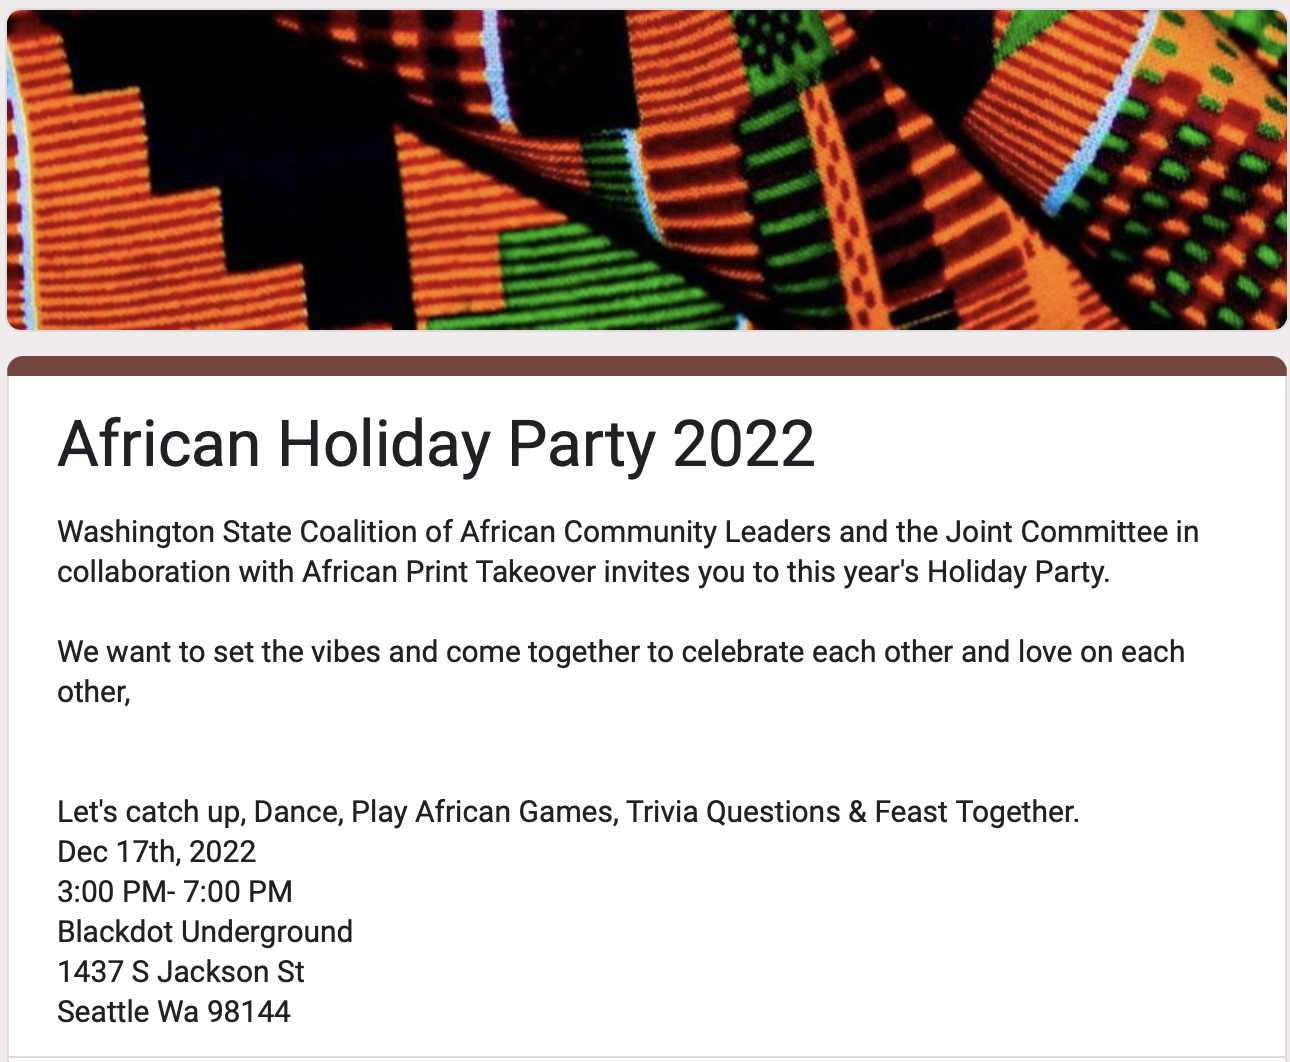 African Holiday Party 2022